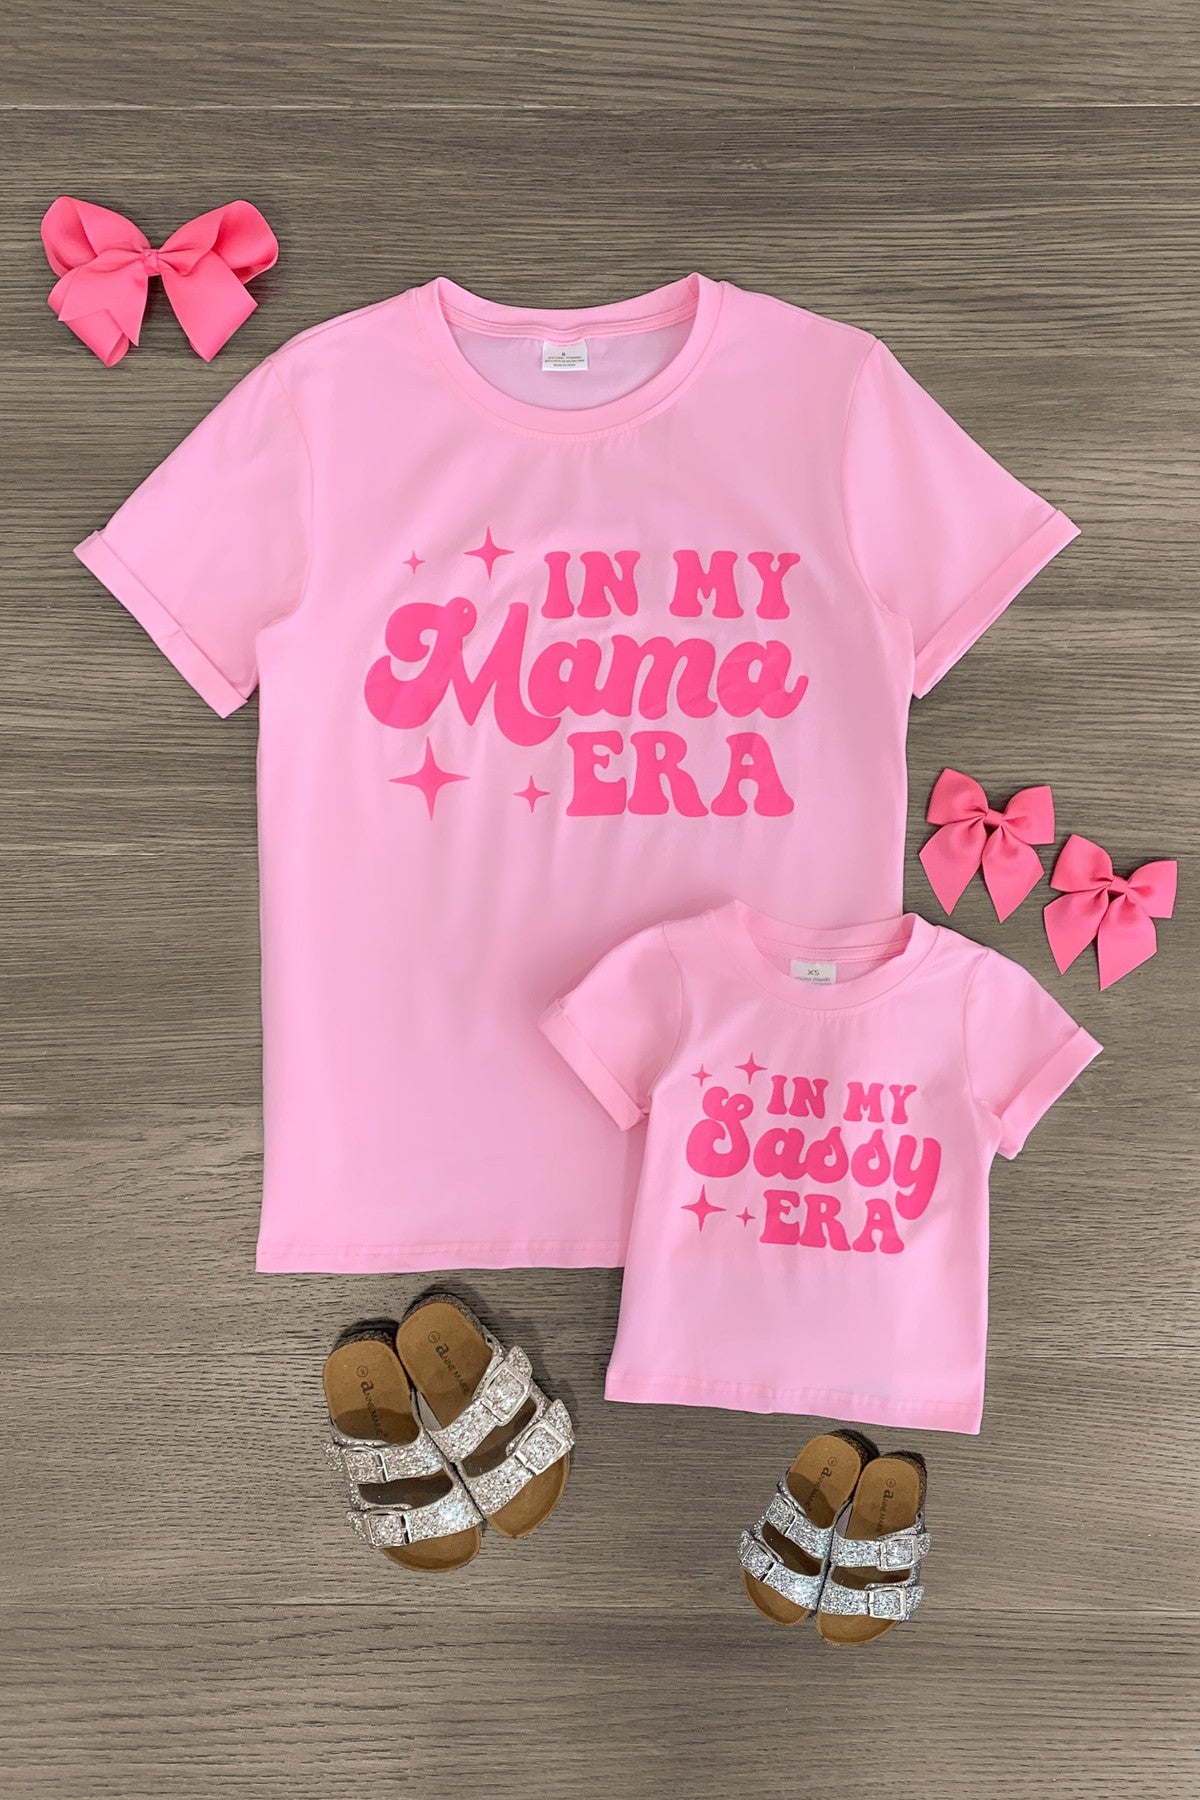 Mom & Me - "In My Mama & Sassy Era" Pink Top - Sparkle in Pink